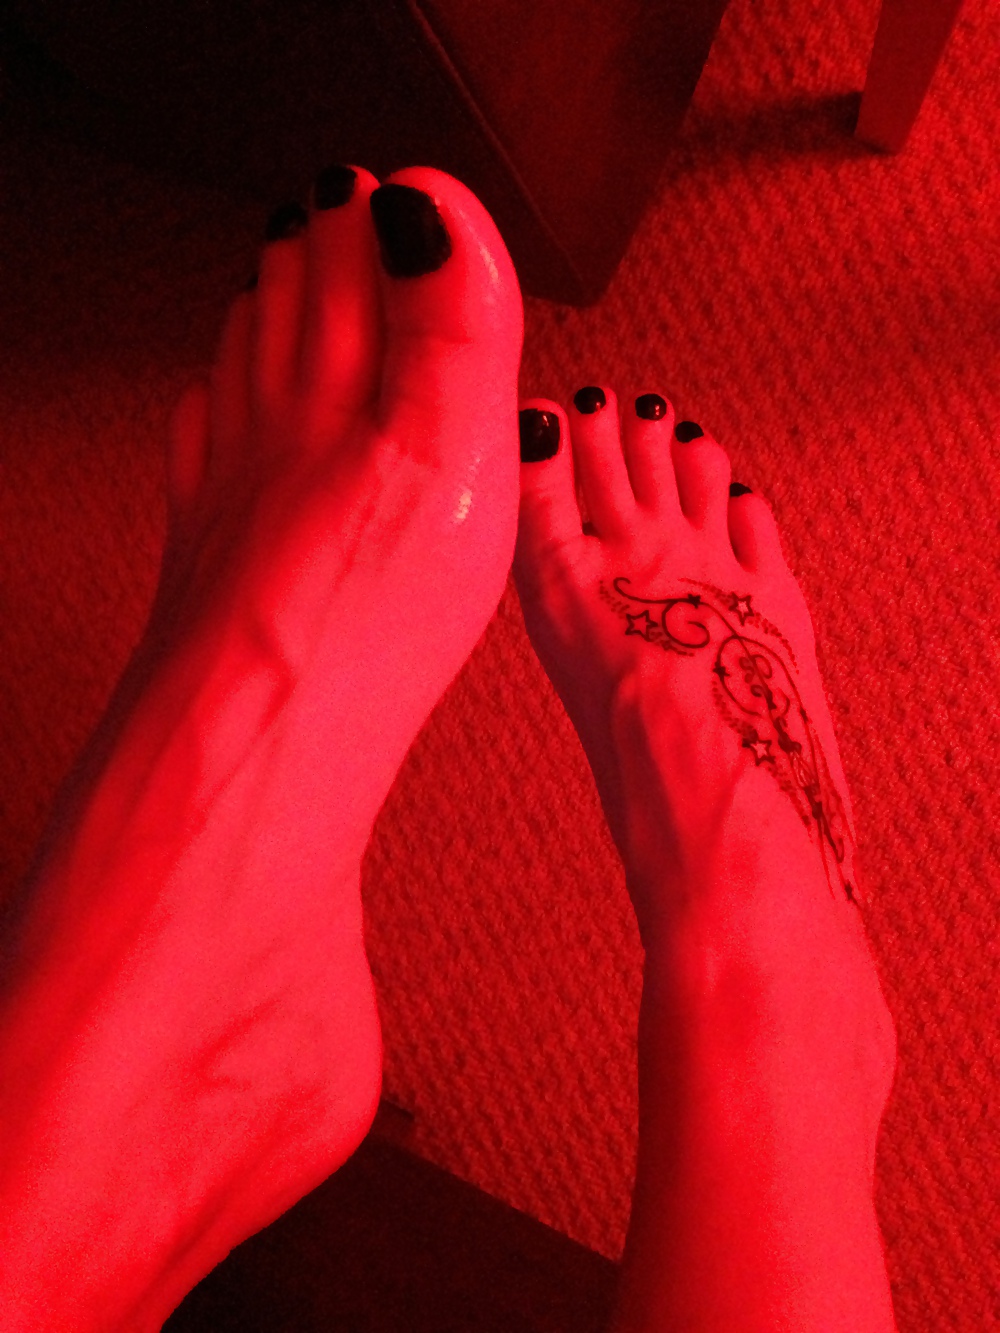 Sex new foot pics for fans of my gf,s feet image